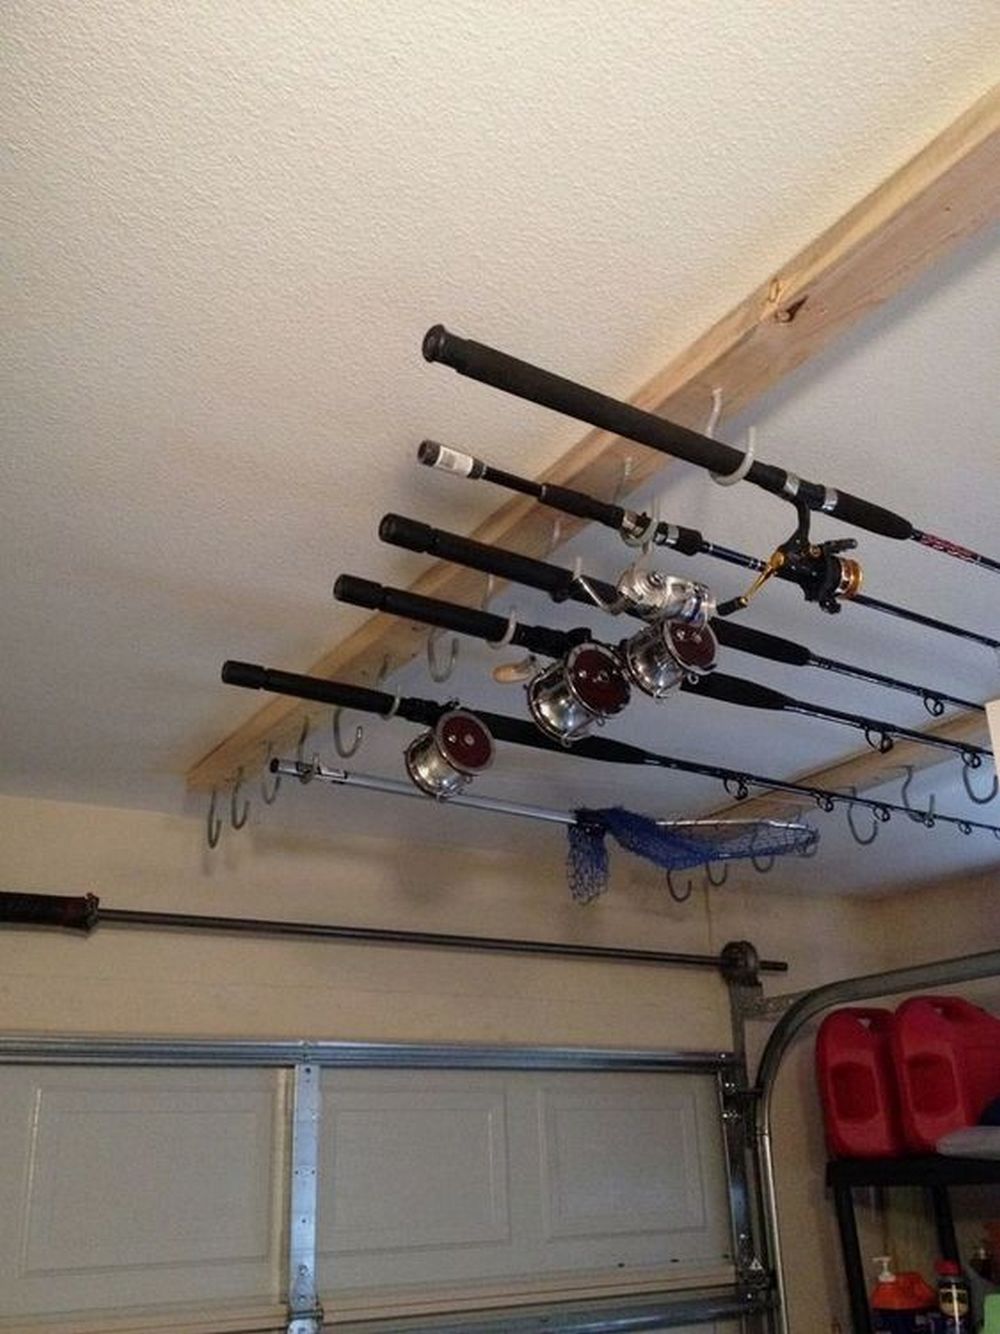 How to make a fishing rod holder for your ceiling 